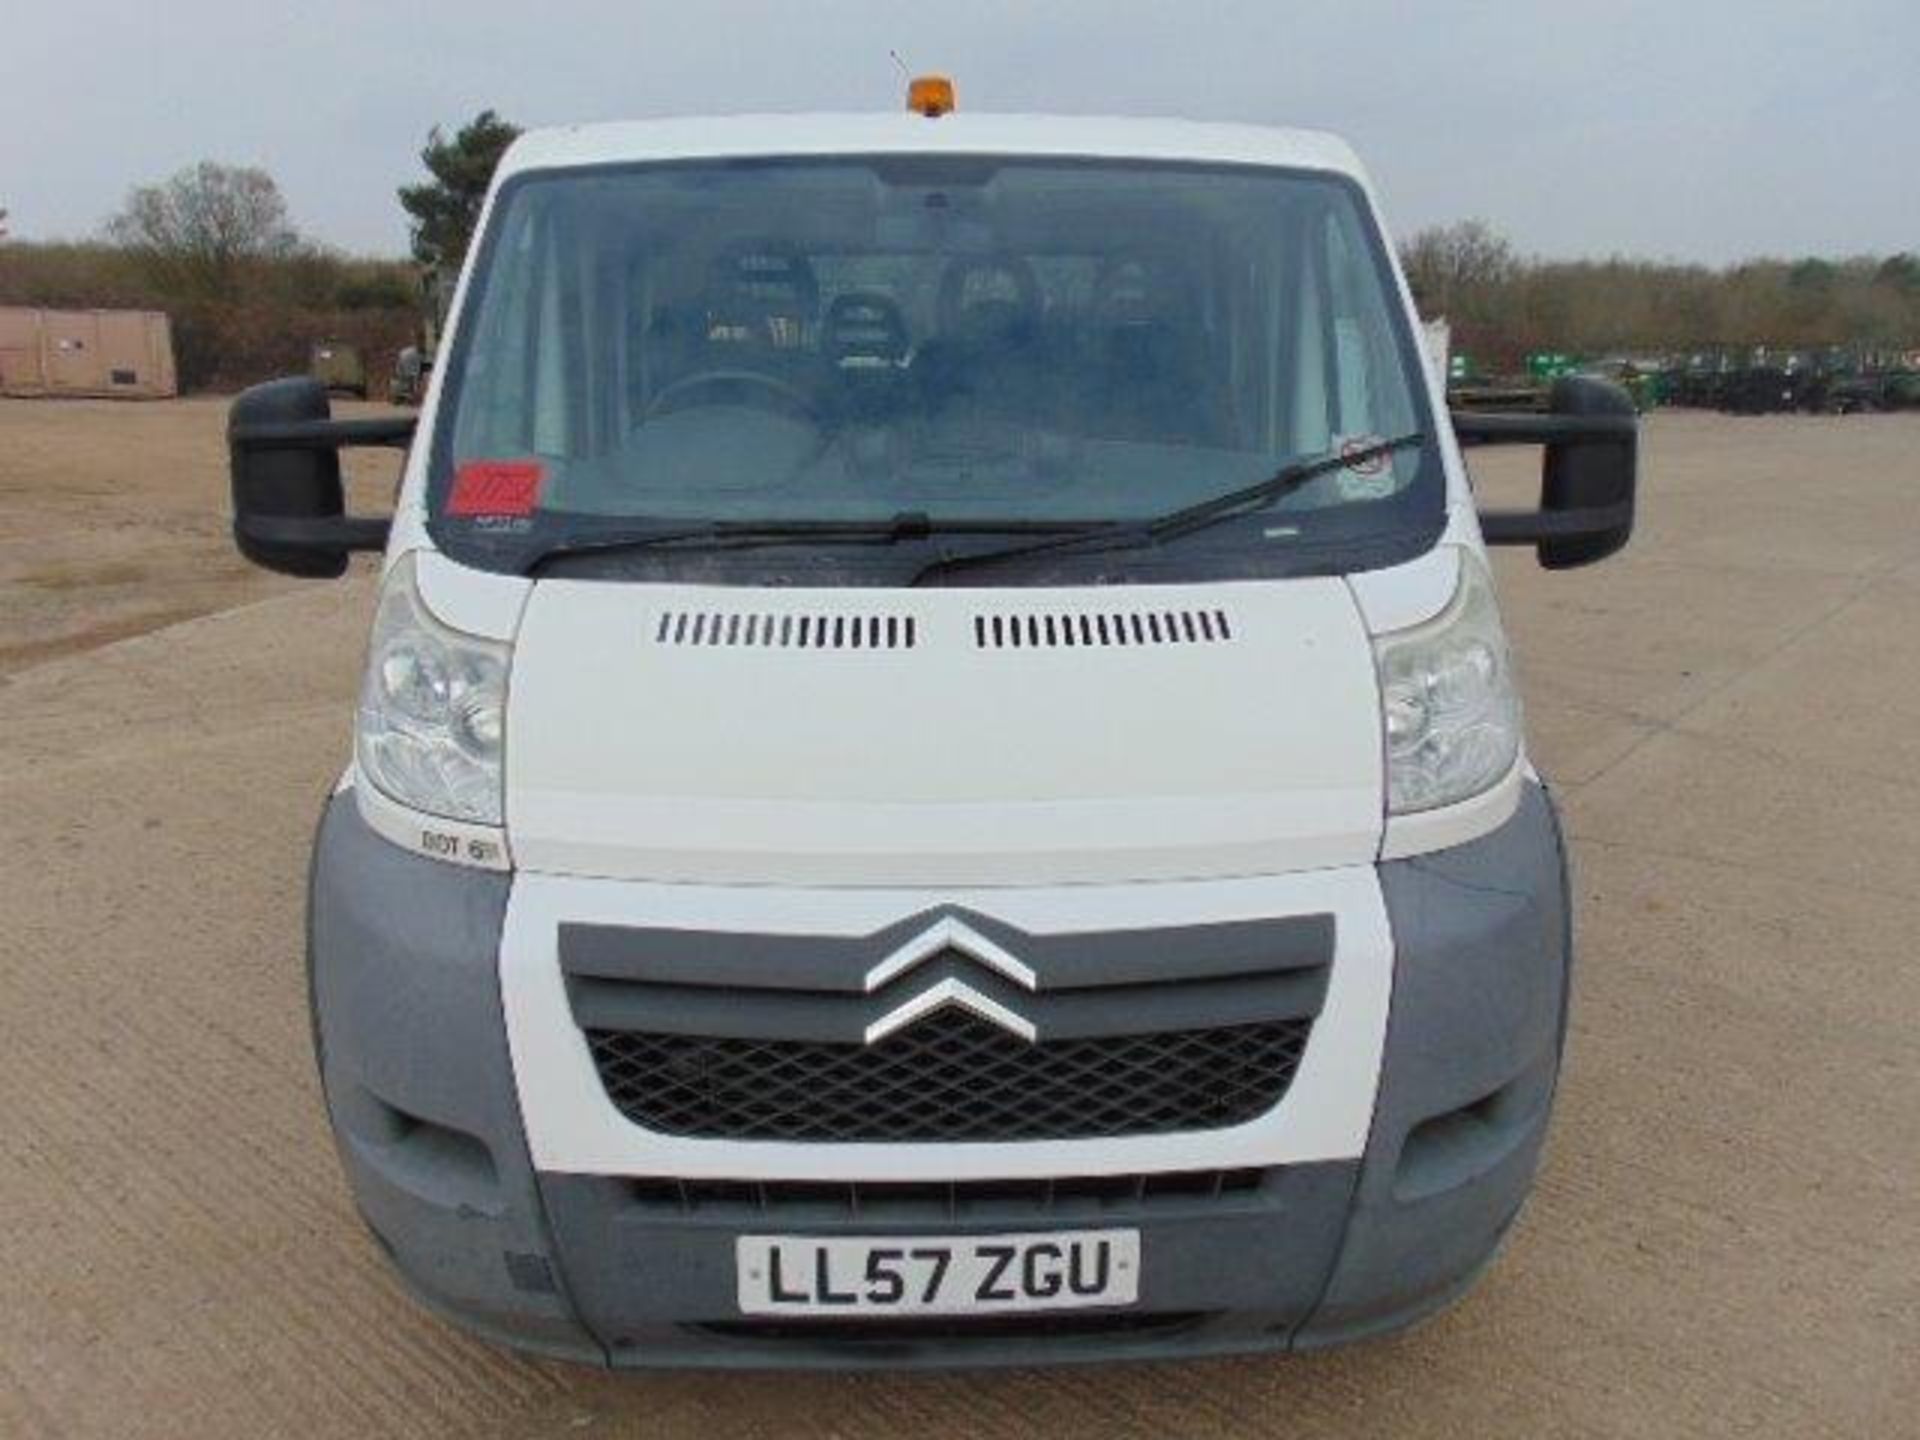 2007 Citroen Relay 7 Seater Double Cab Dropside Pickup ONLY 27,105 miles! - Image 2 of 27